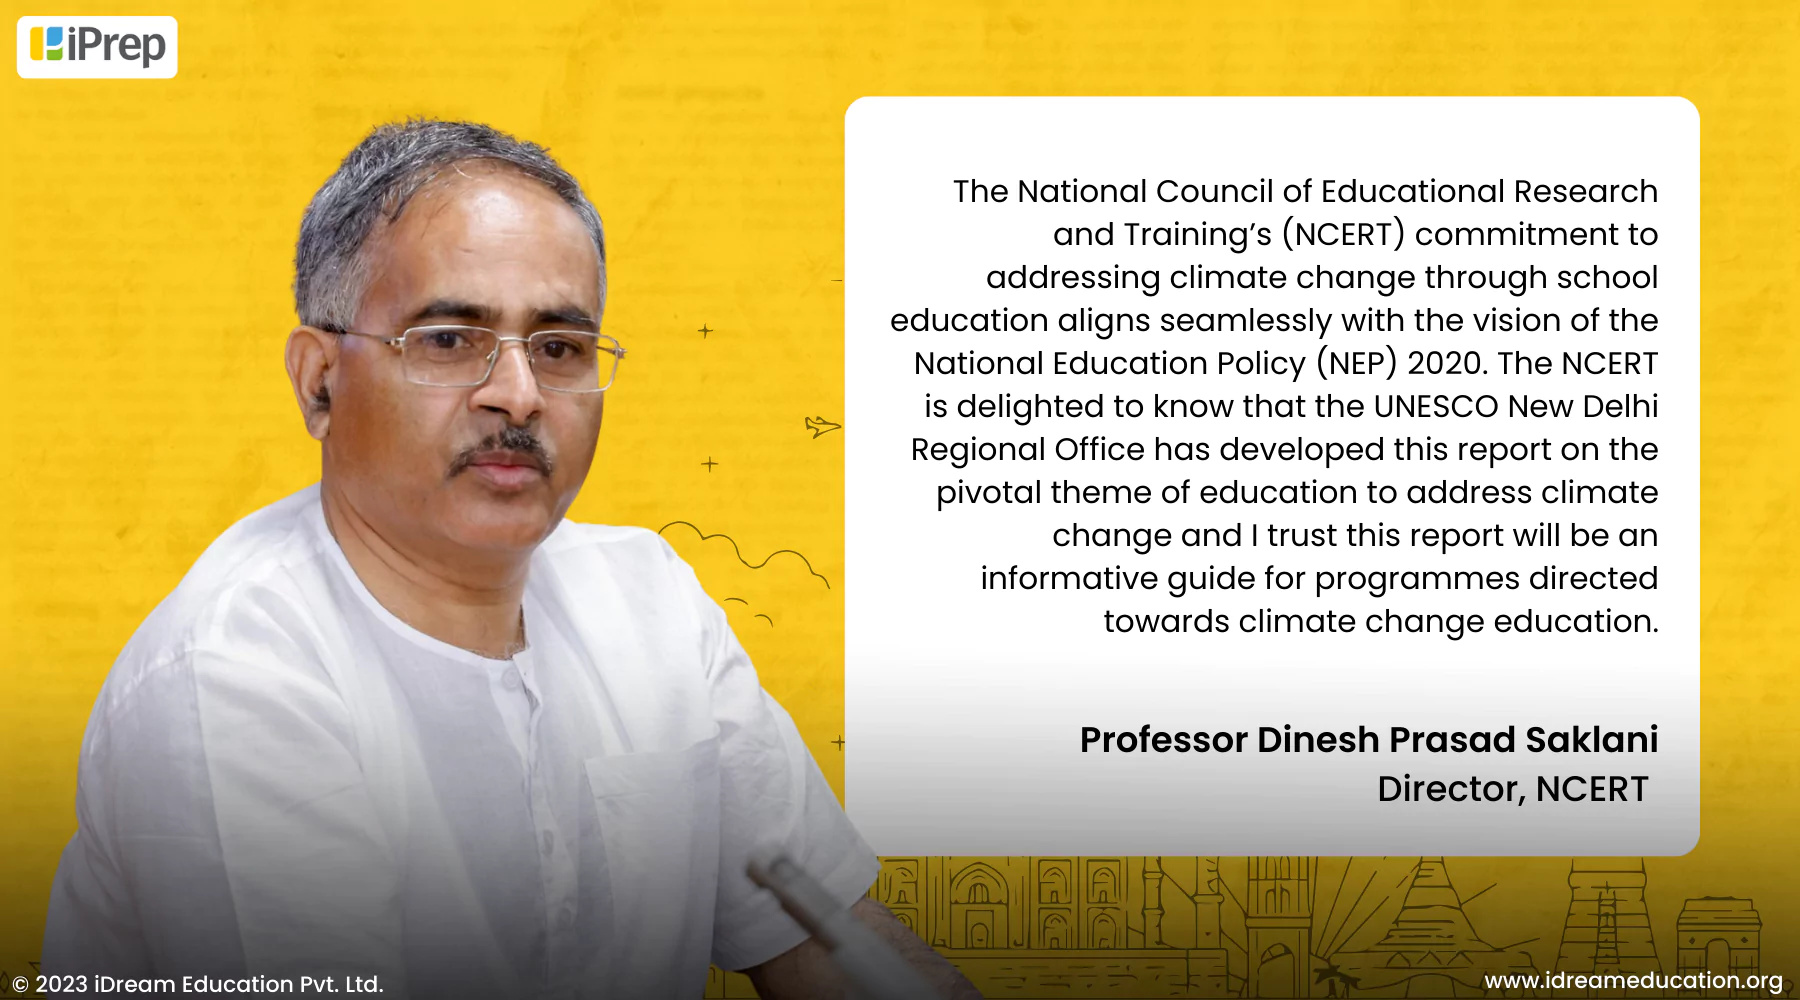 Dinesh Prasad Saklani Ji, Director, National Council of Educational Research and Training ( NCERT ), on making environmental education an integral part of the curriculum and NCERT’s commitment to addressing climate change